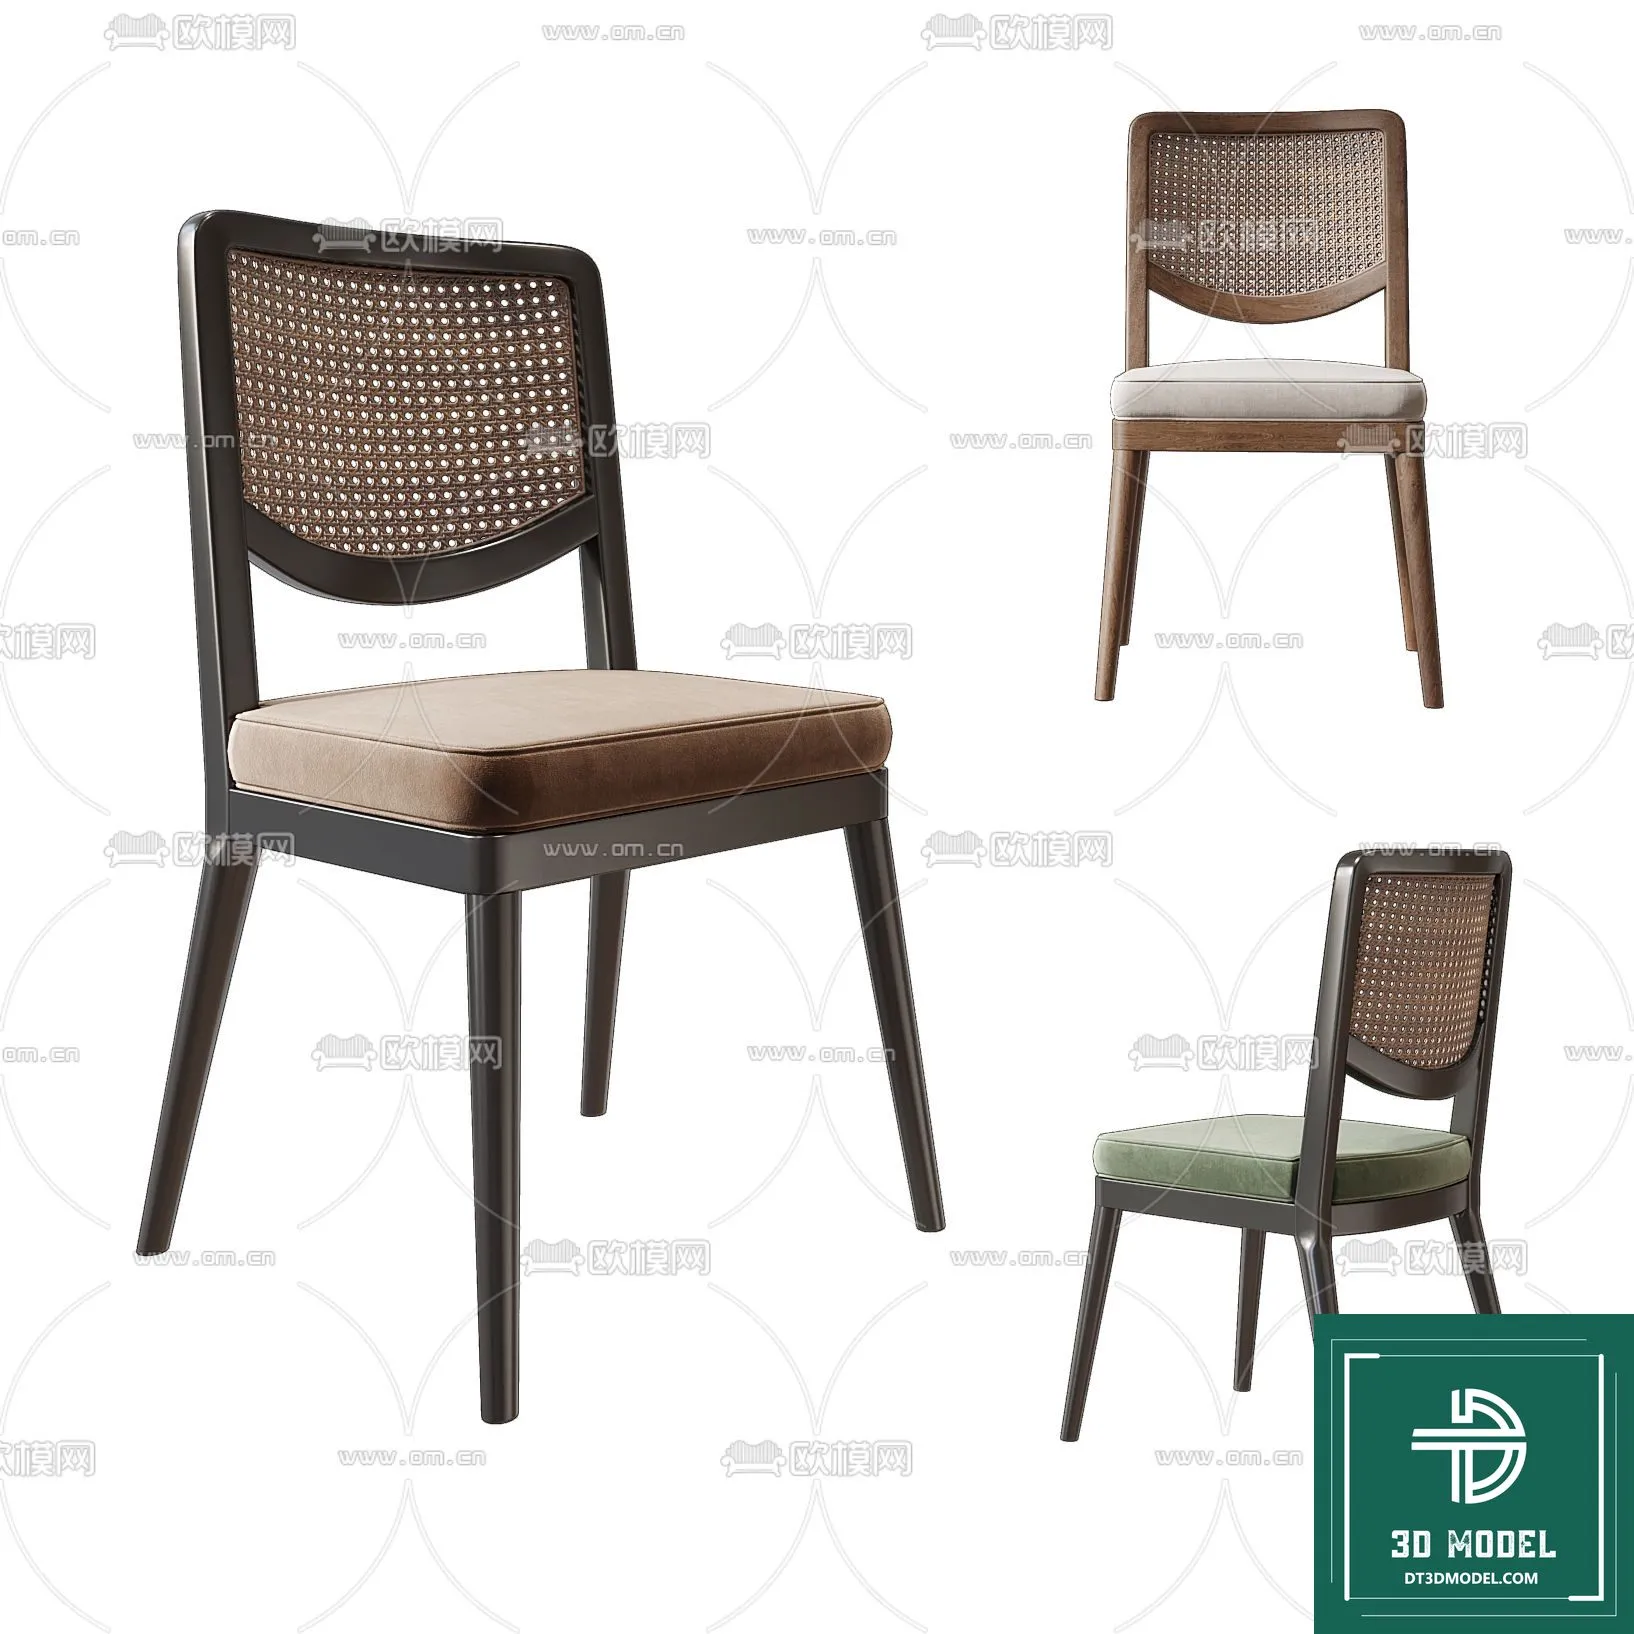 INDOCHINE STYLE – 3D MODELS – 595